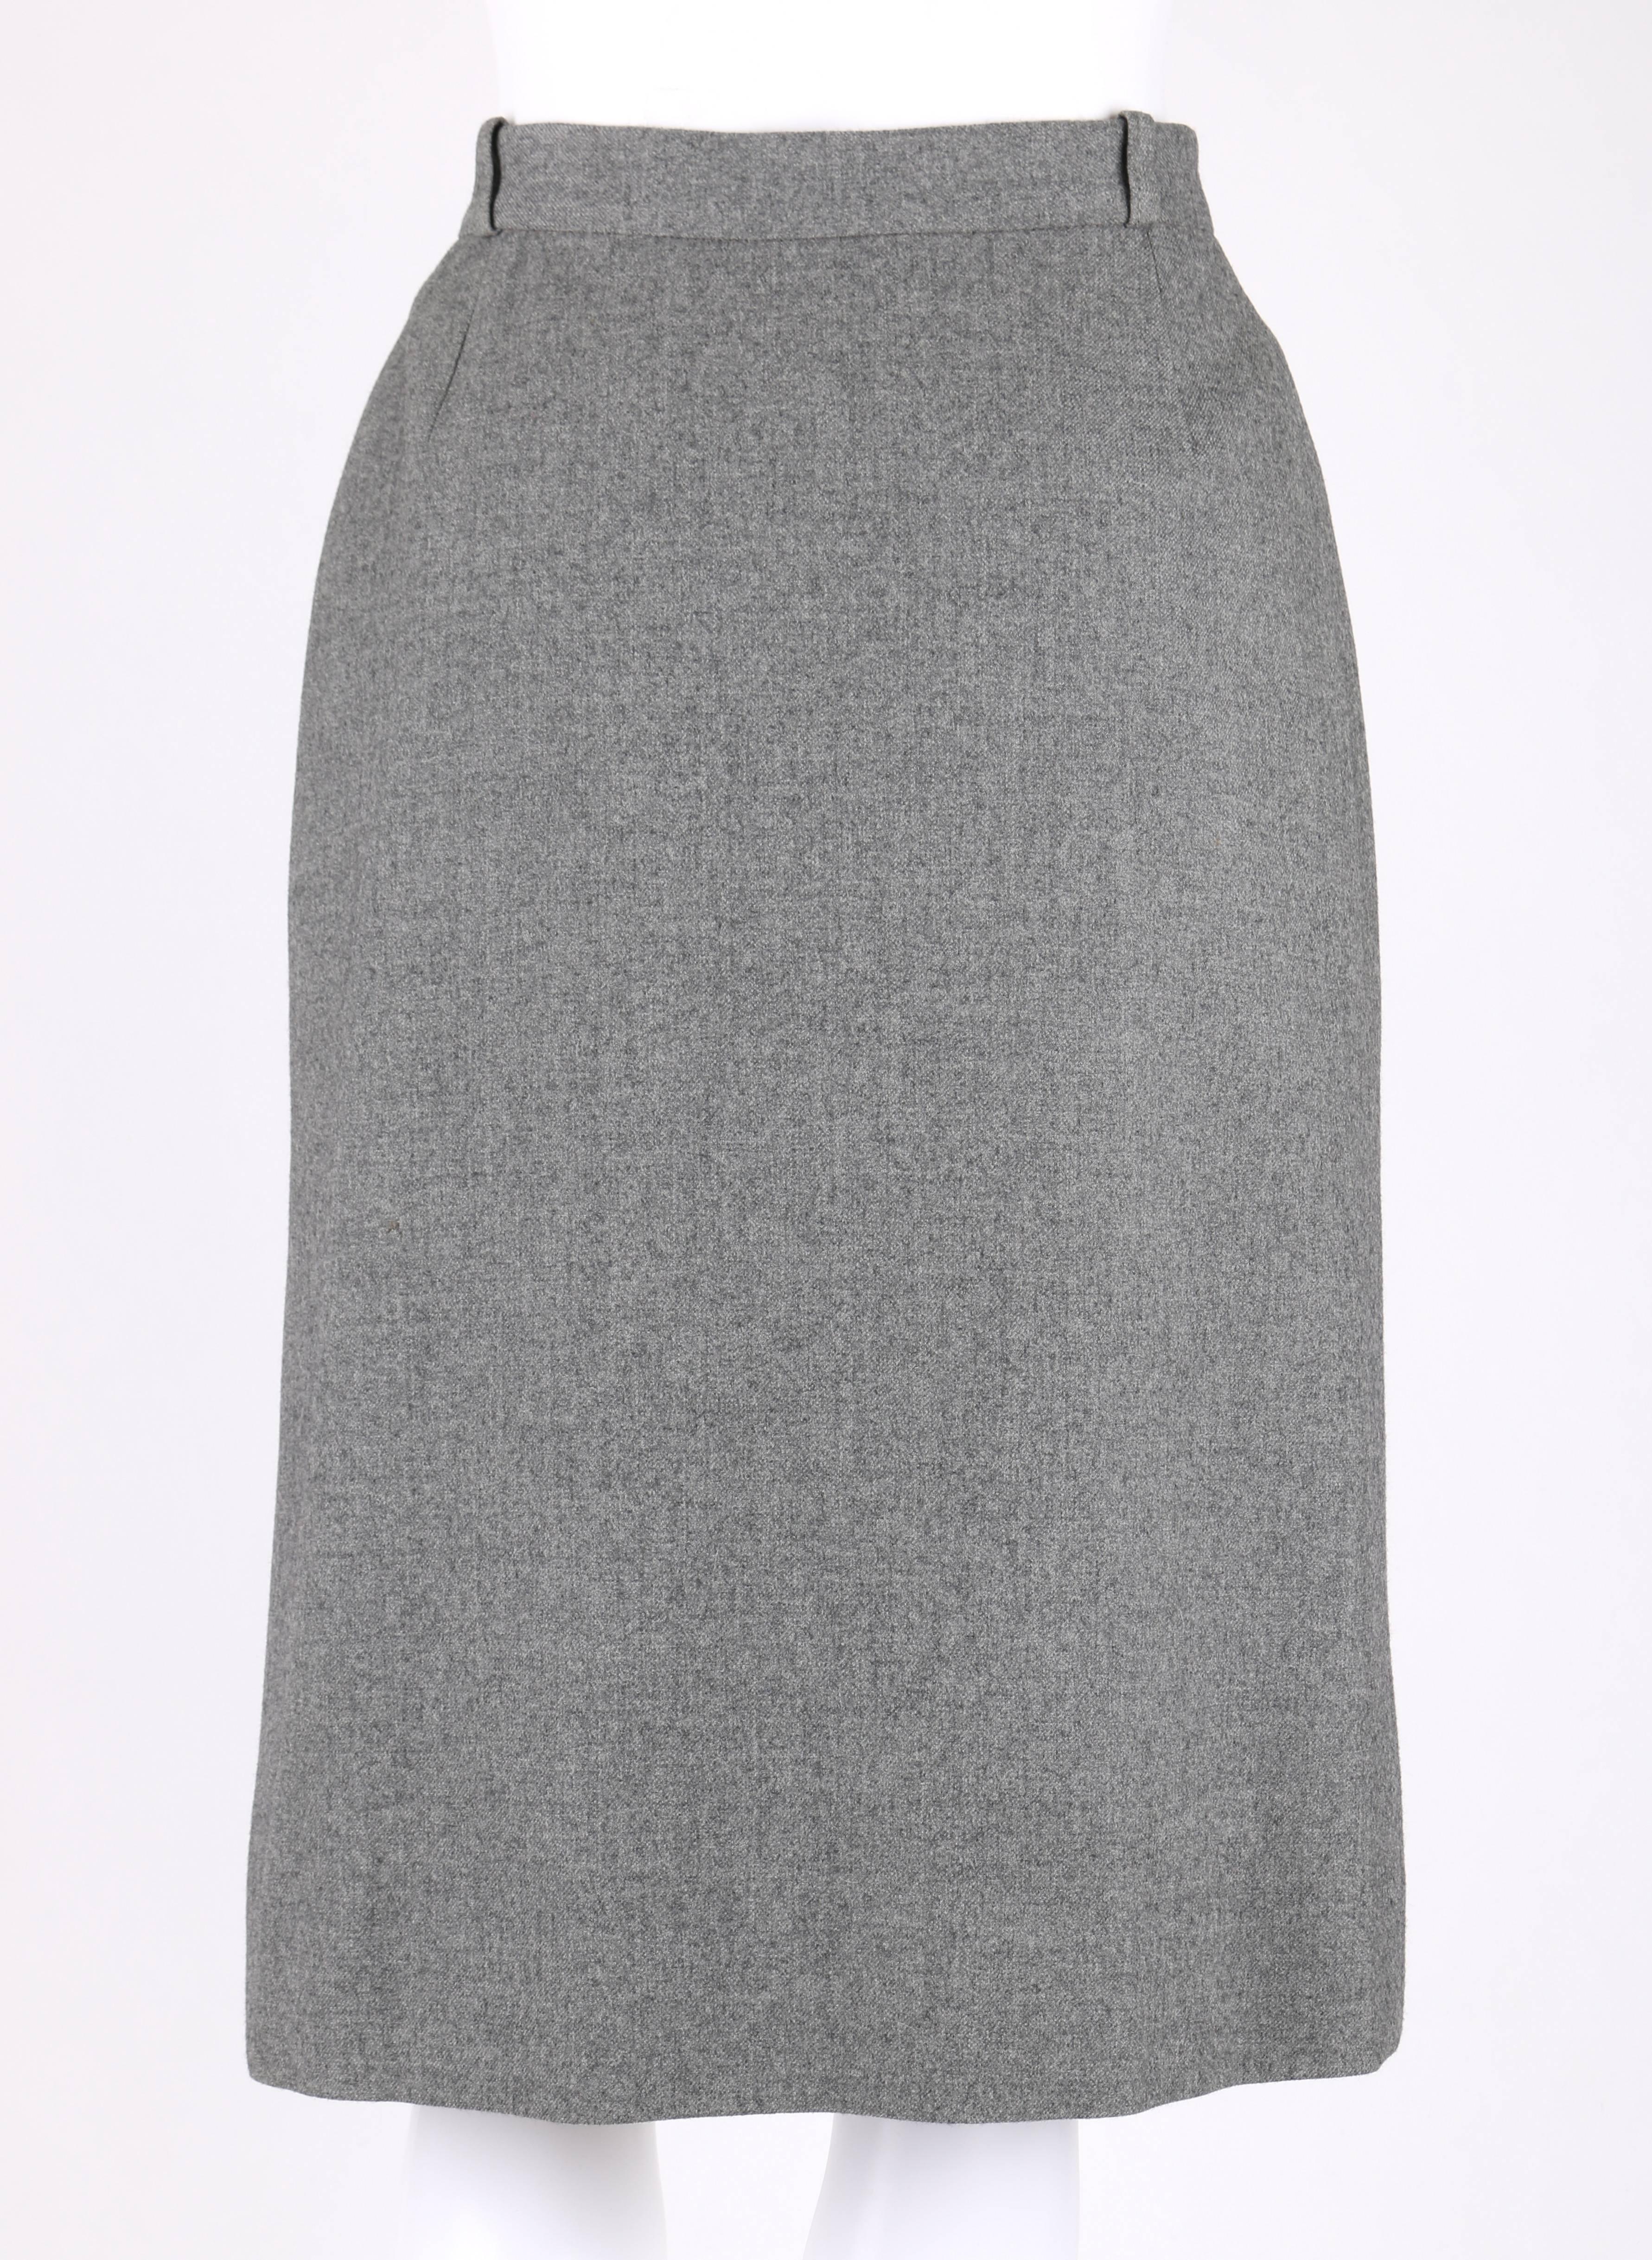 Women's GUCCI c.1970's Gray Wool Classic Wrap Skirt Brown Leather Piping Trim For Sale